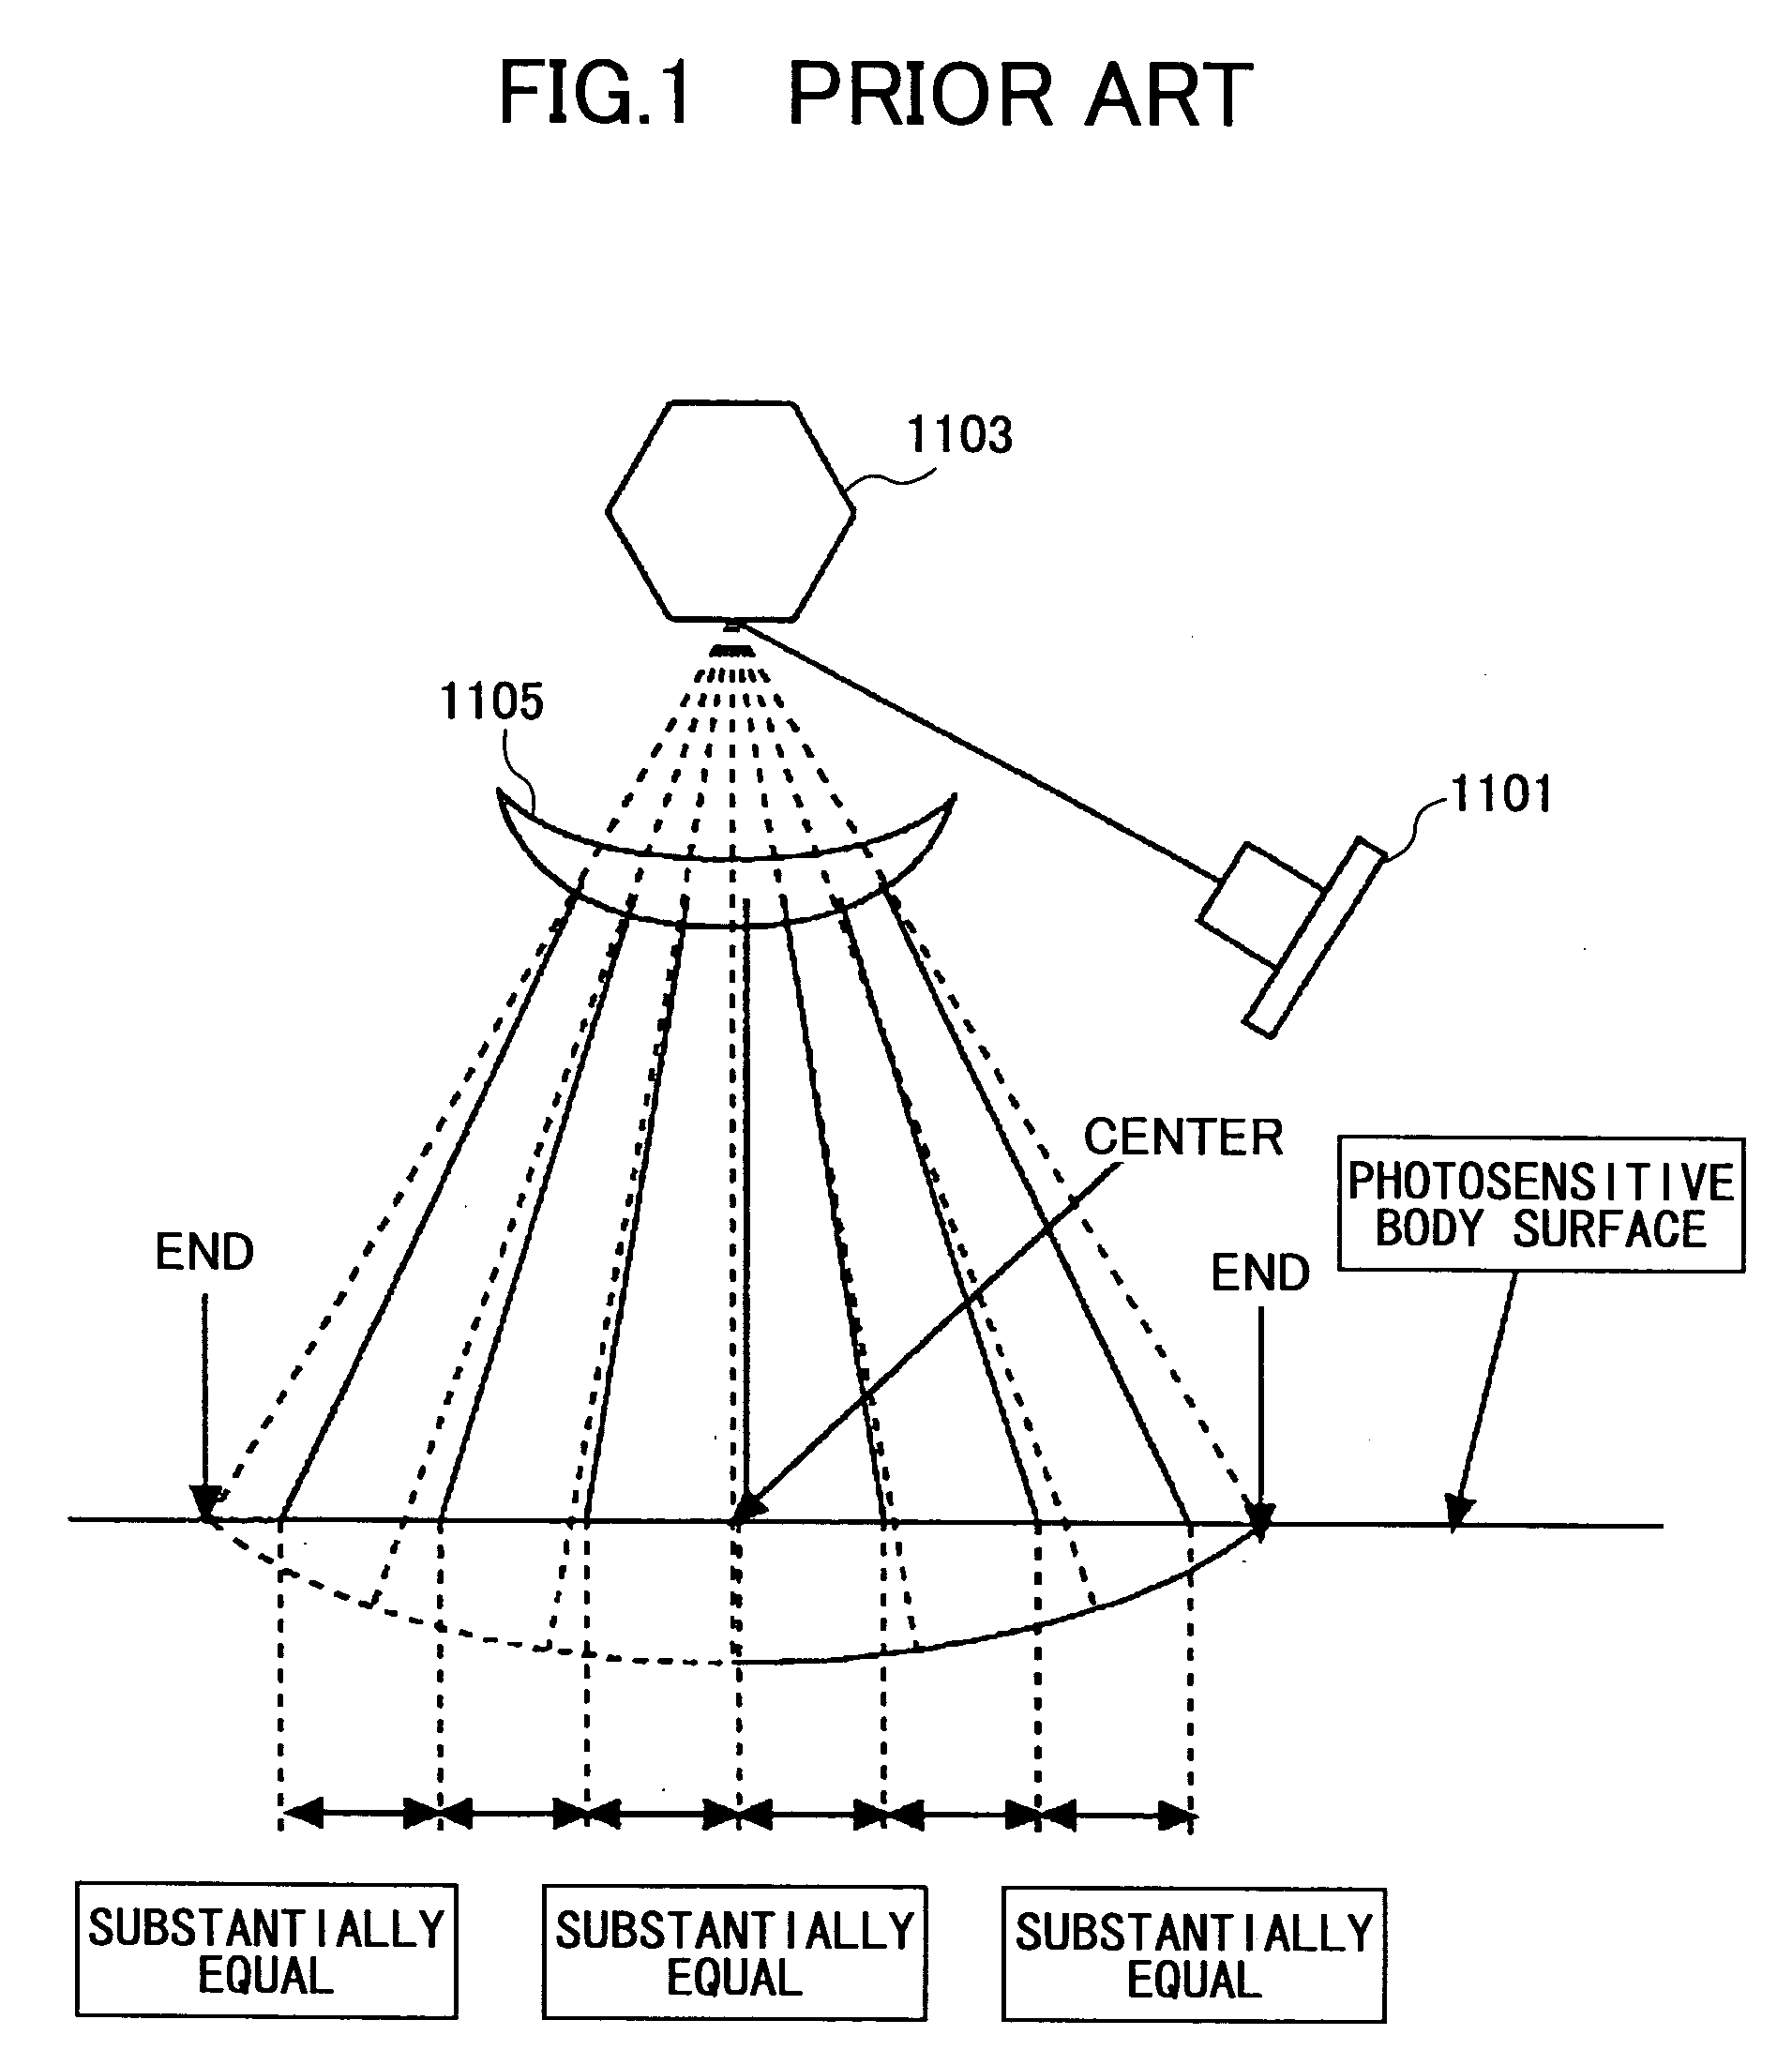 Image-forming apparatus and optical scanner